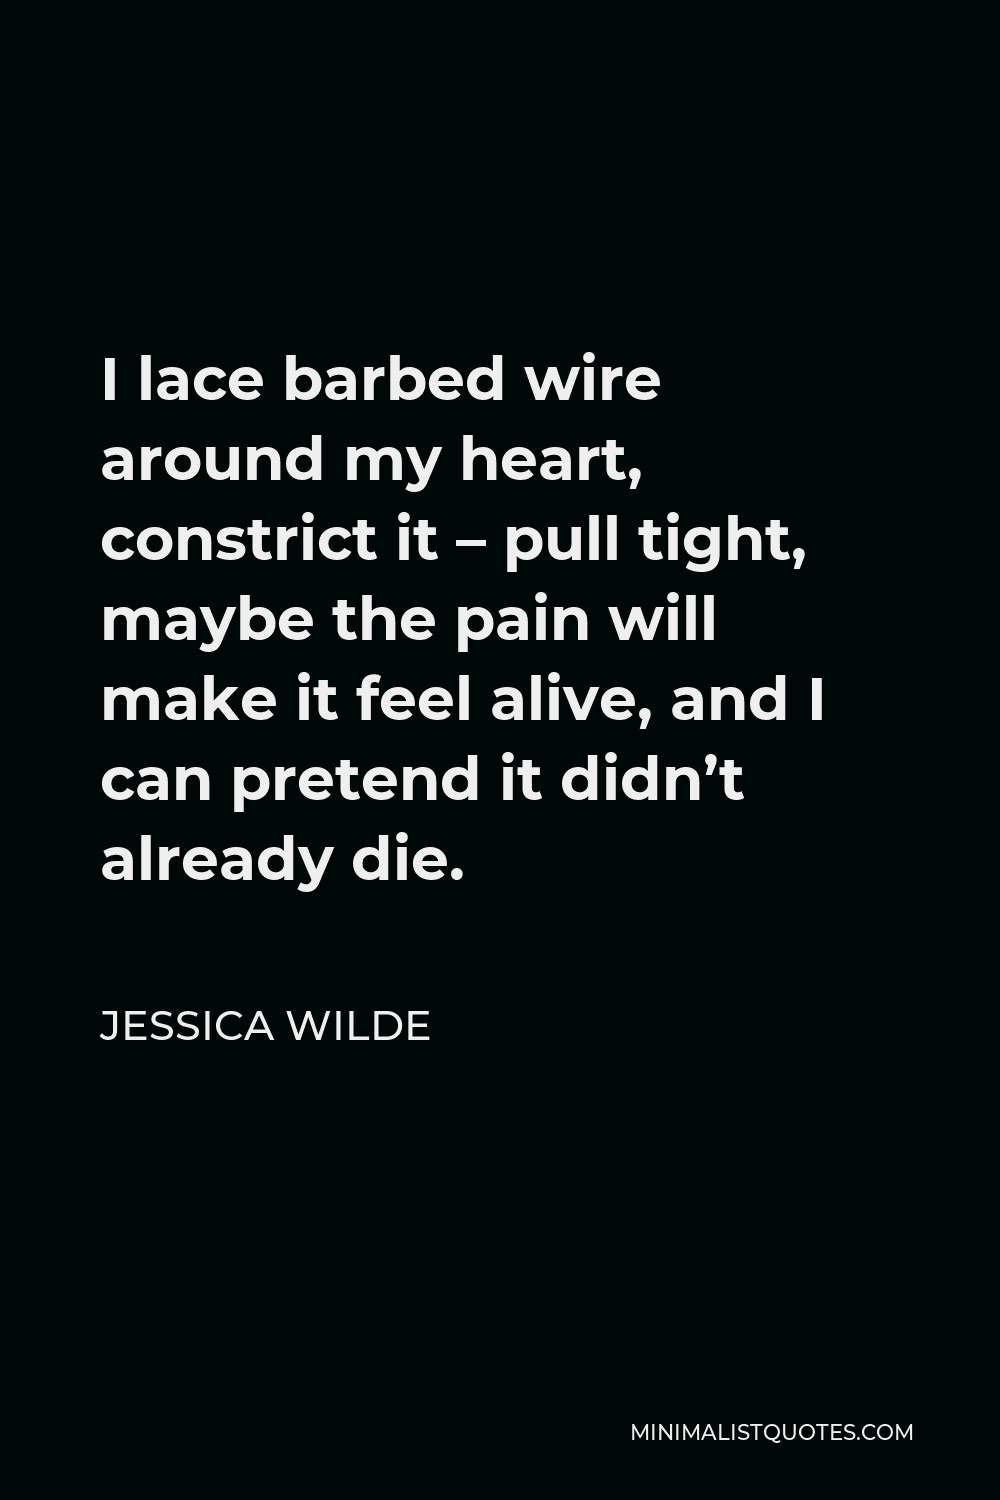 Jessica Wilde Quote - I lace barbed wire around my heart, constrict it – pull tight, maybe the pain will make it feel alive, and I can pretend it didn’t already die.